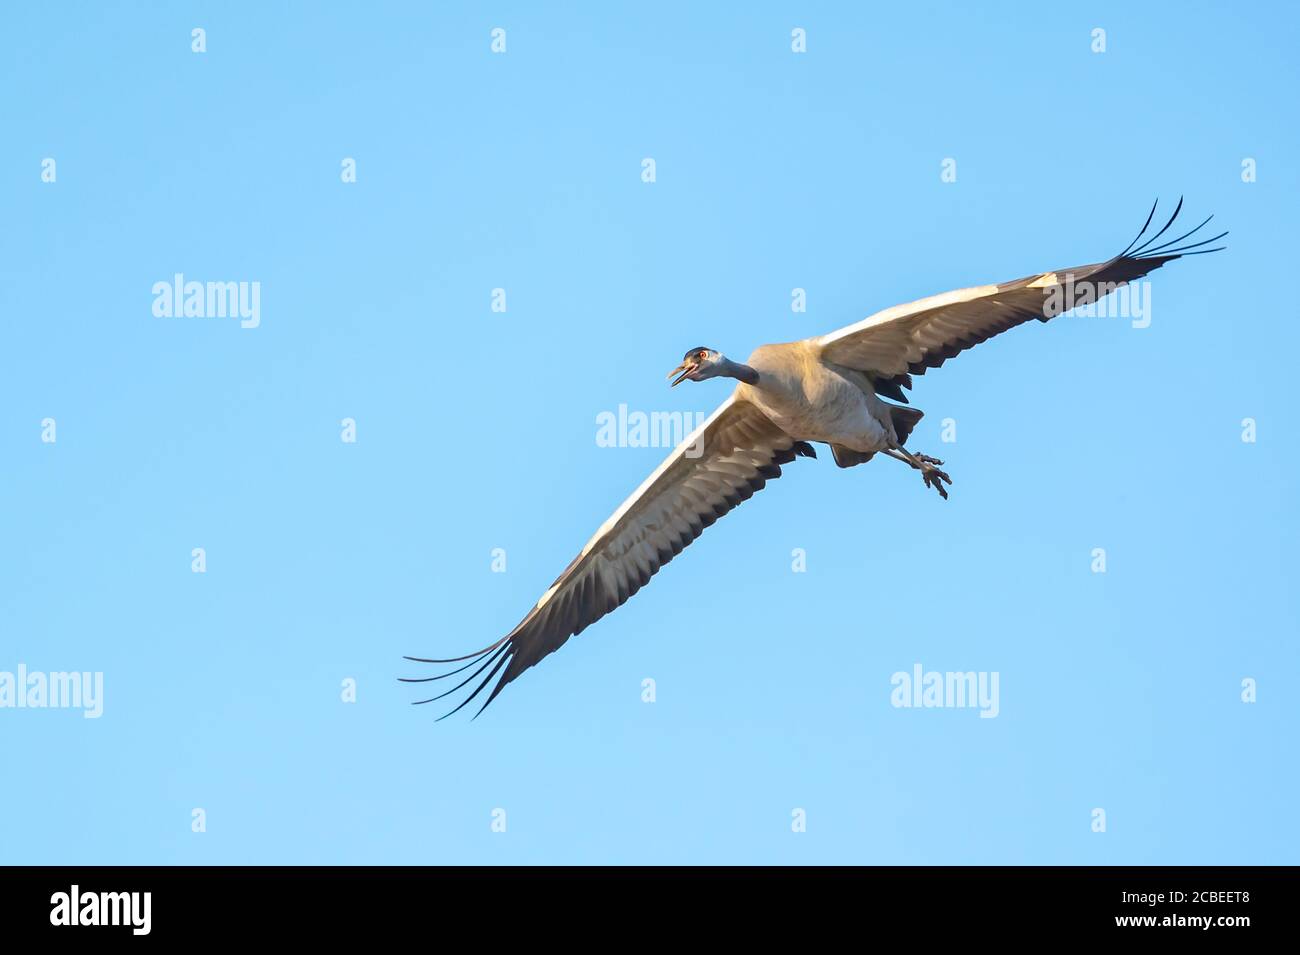 Close up of a single Common crane (Grus grus) in flight. Large migratory crane species that lives in wet meadows and marshland. It has a wingspan of b Stock Photo